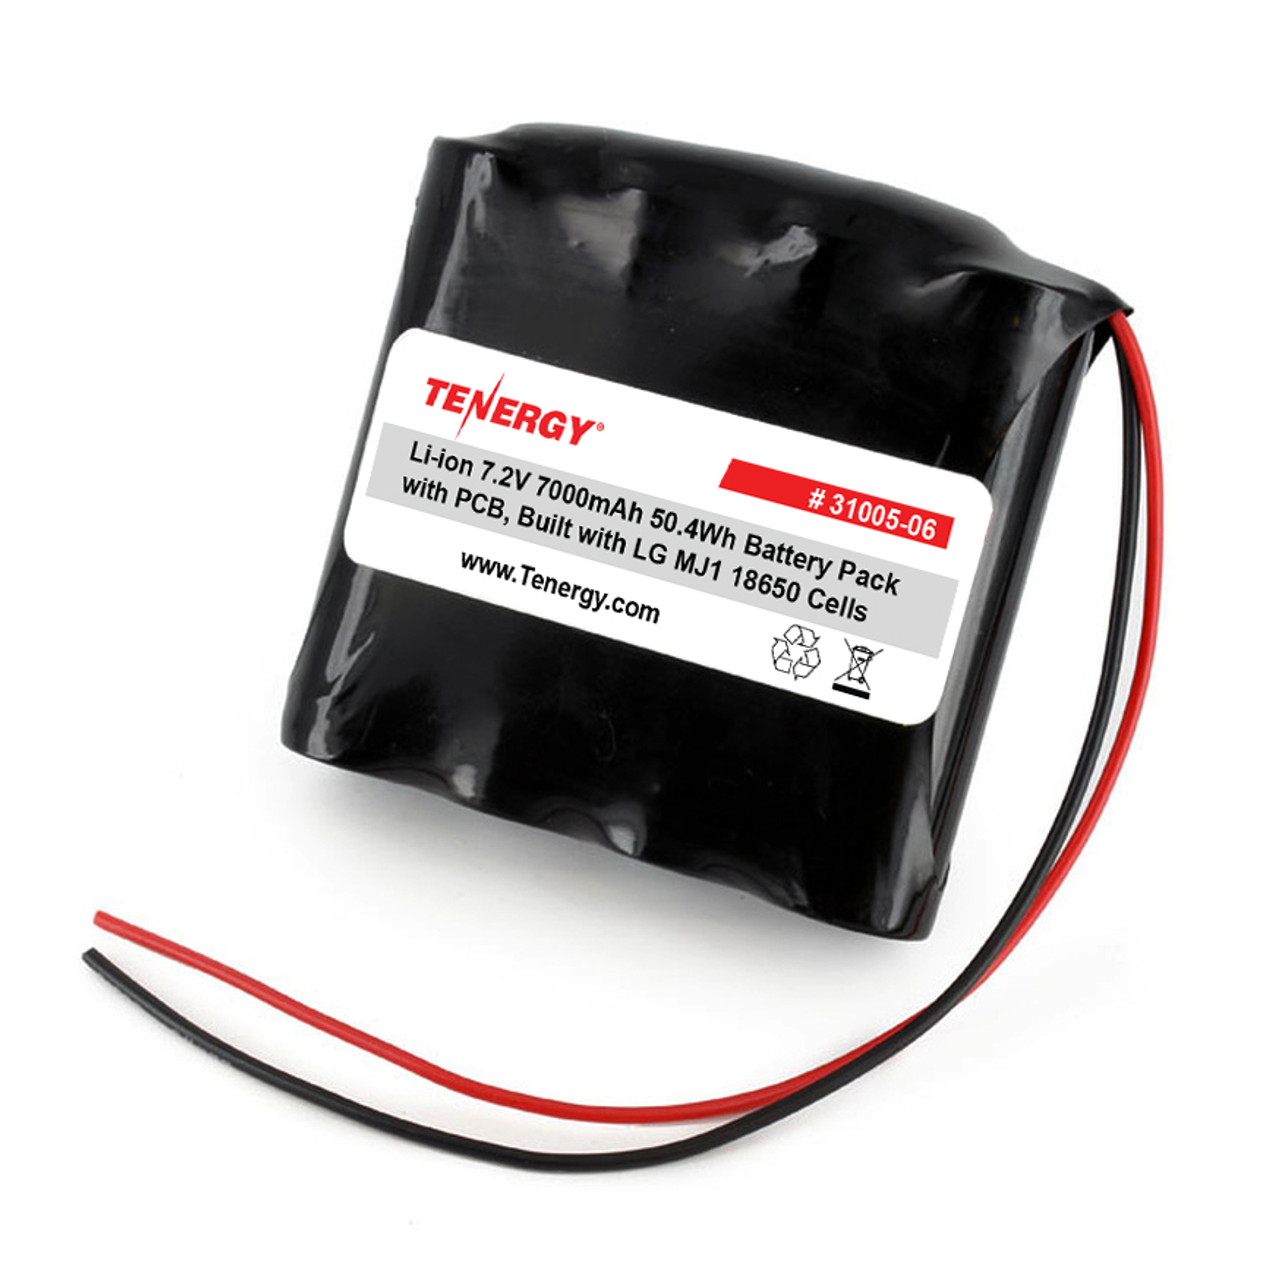 AT: Tenergy Li-ion 7.2V 7000mAh Rechargeable Battery Pack w/ PCB (2S2P, 50.4Wh, 10A Rate) - Built with LG MJ1 18650 Cells